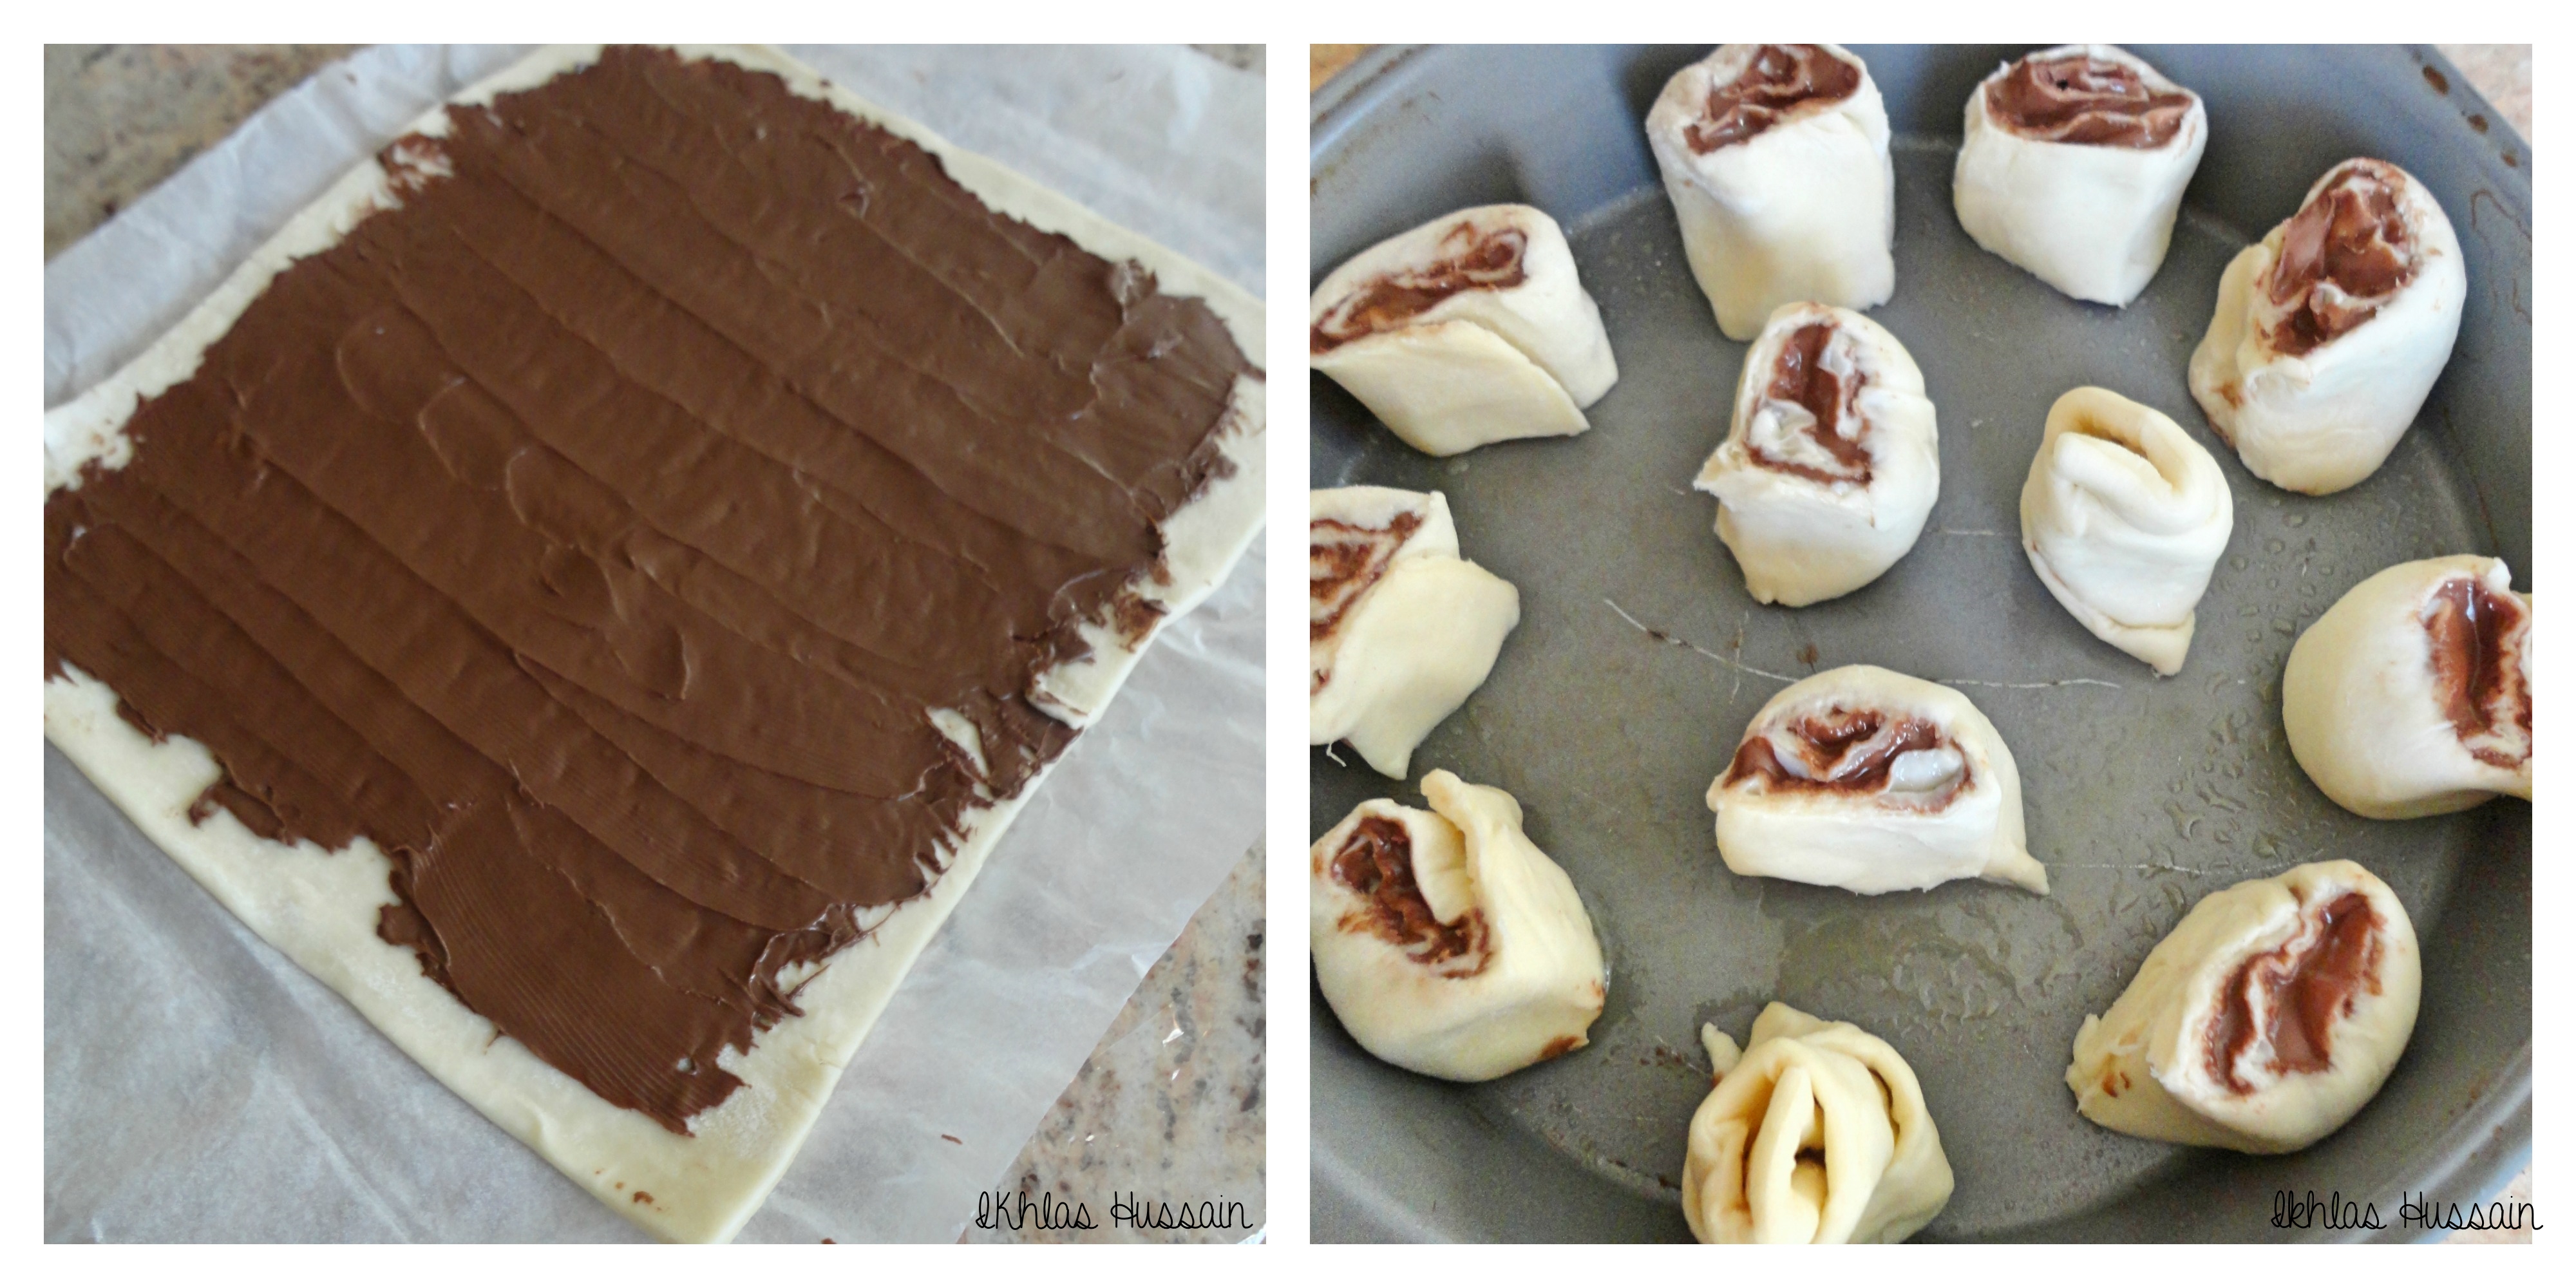 Nutella Rolls - The Whimsical Whims of Ikhlas Hussain